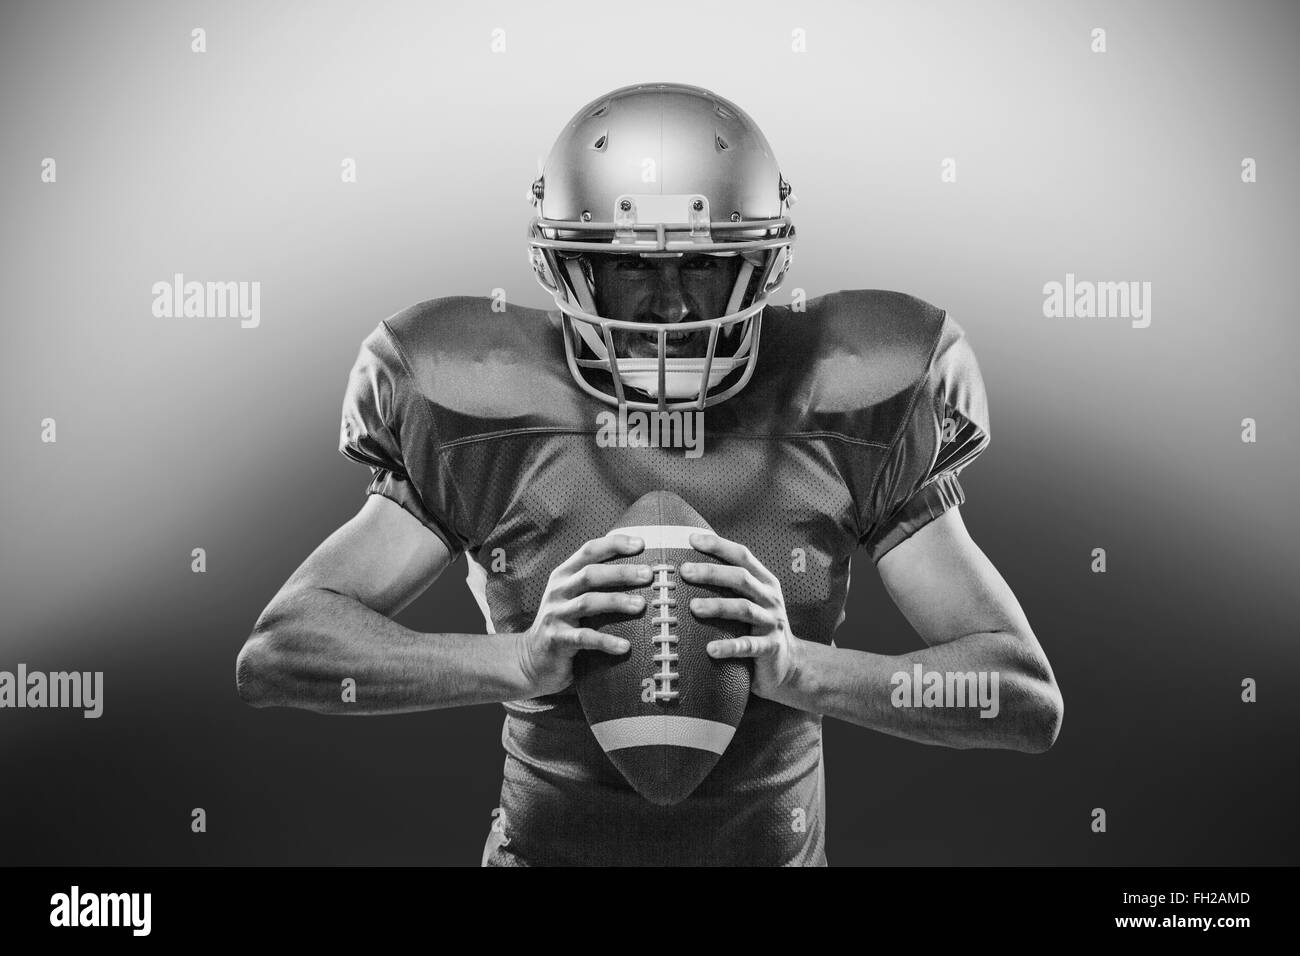 11,657 Football Jersey Black White Images, Stock Photos, 3D objects, &  Vectors